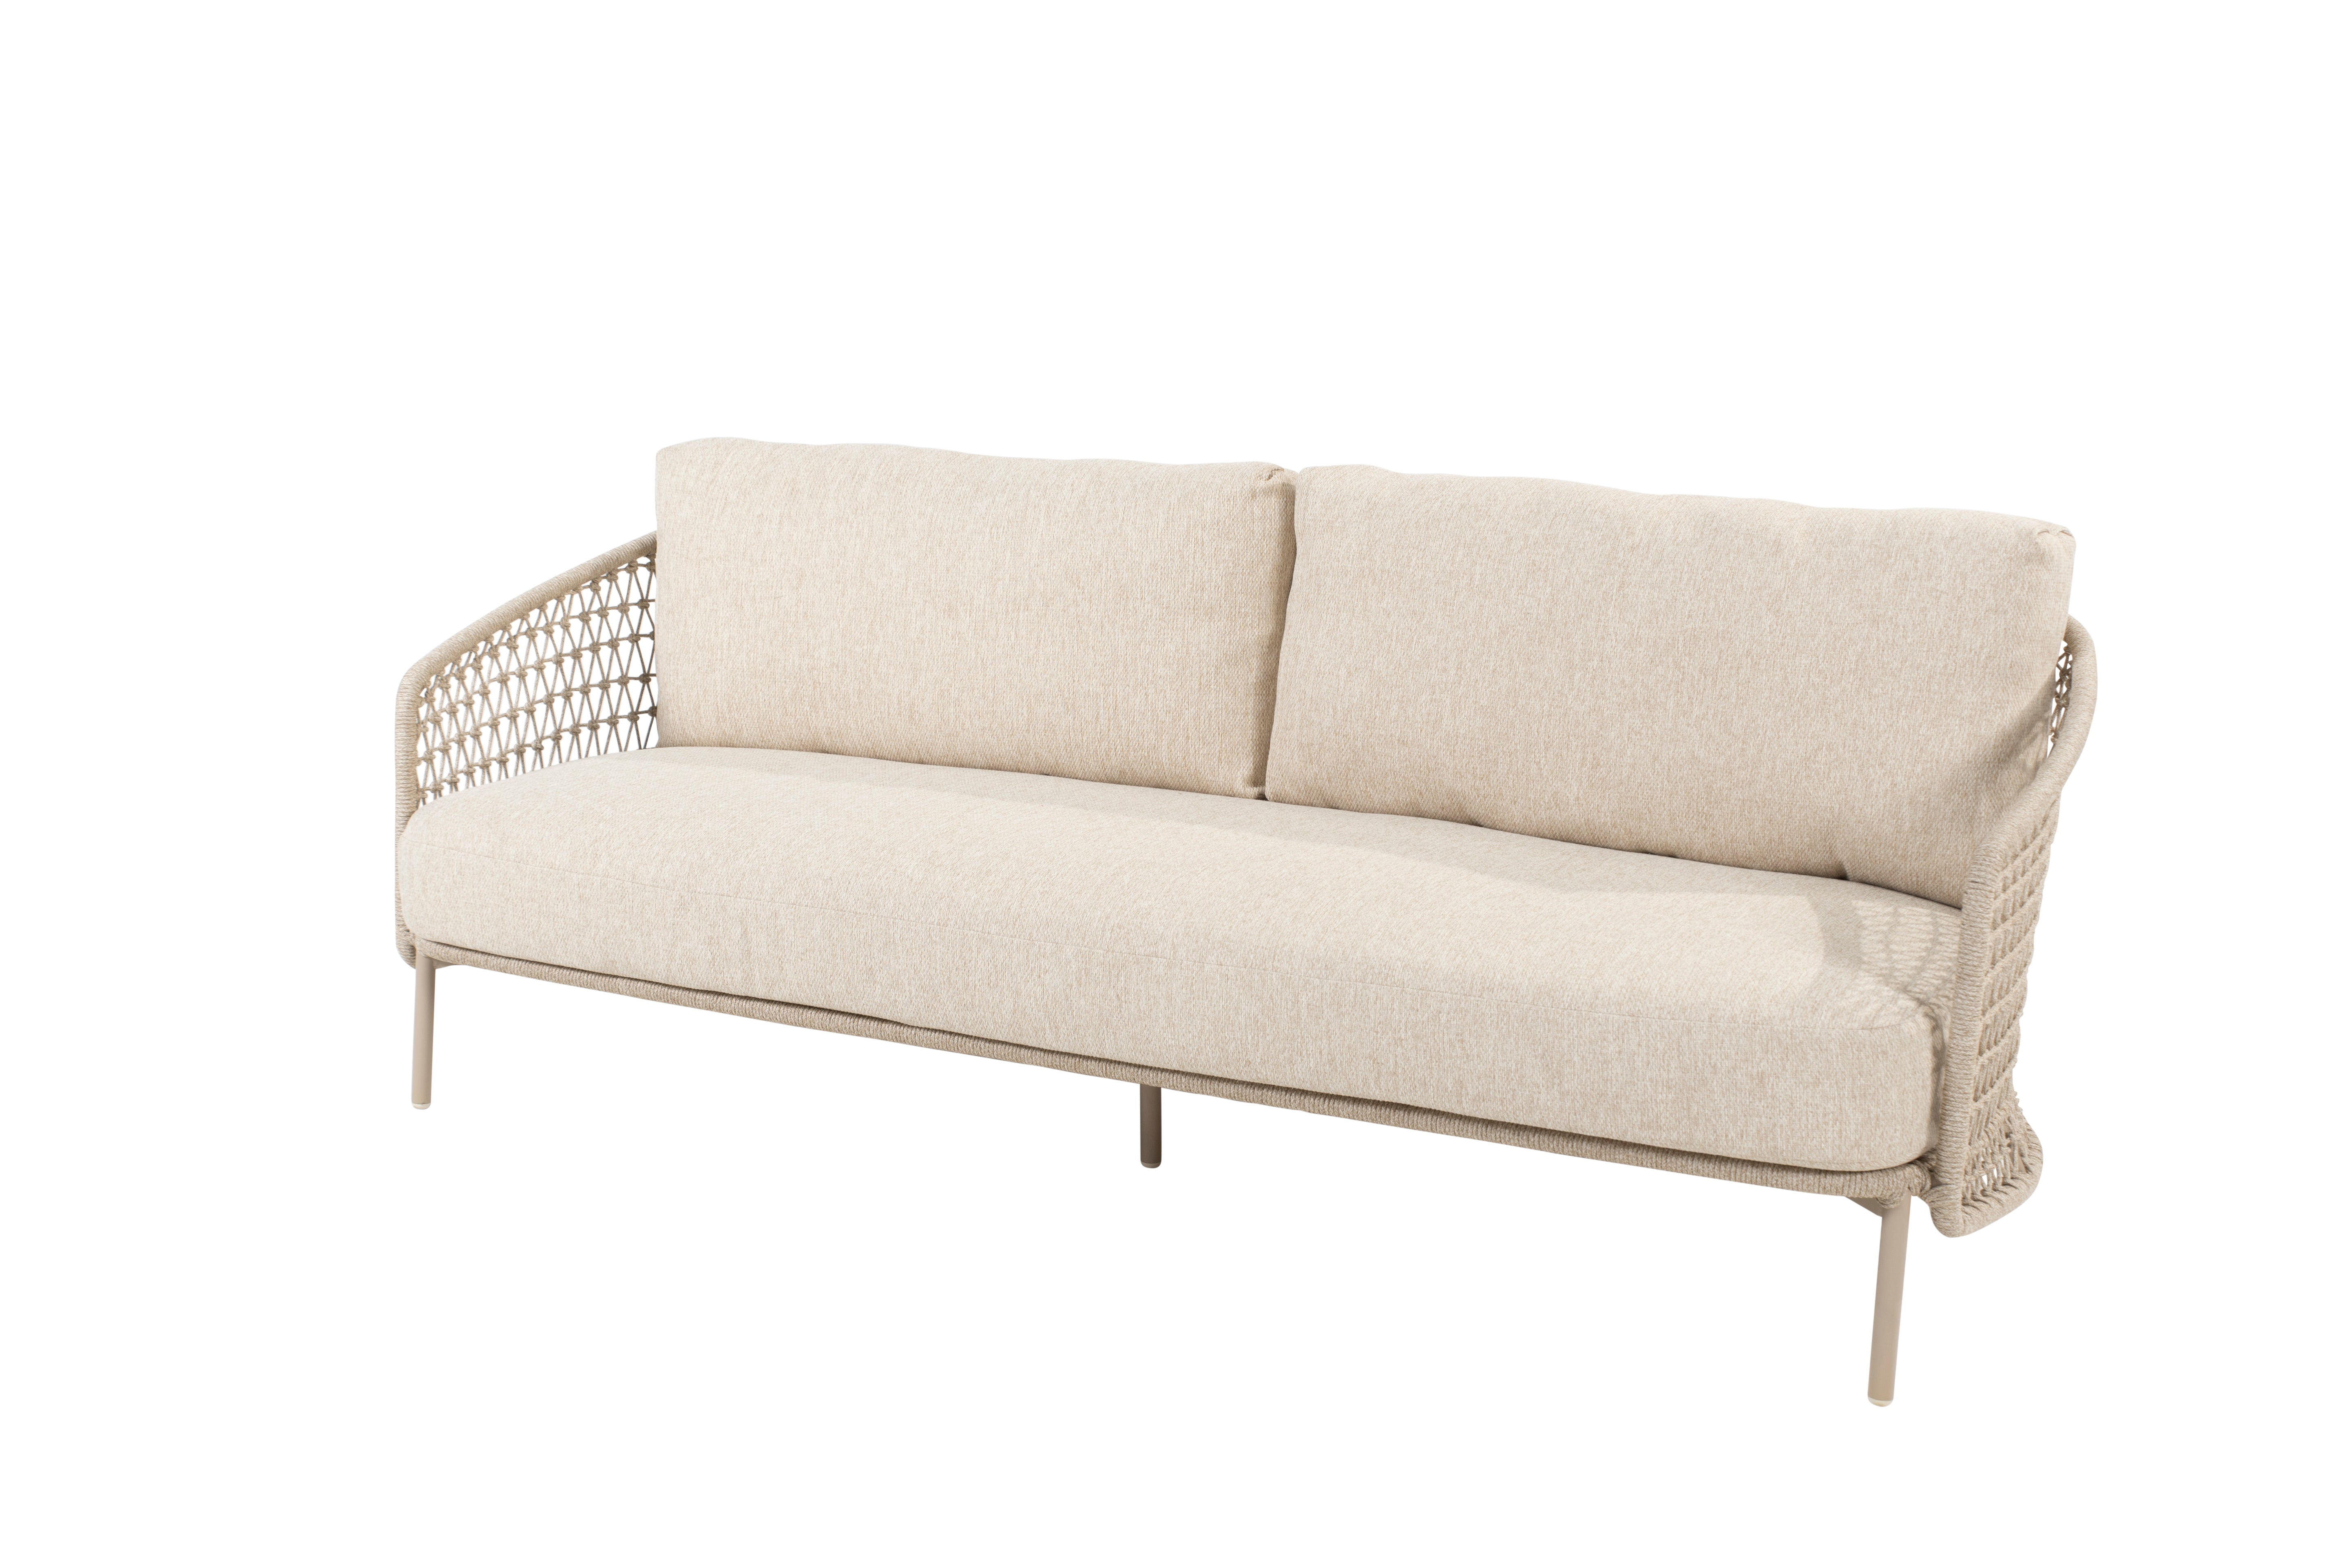 4 Seasons Outdoor Puccini Living 3 Seater Bench Latte With 3 Cushions